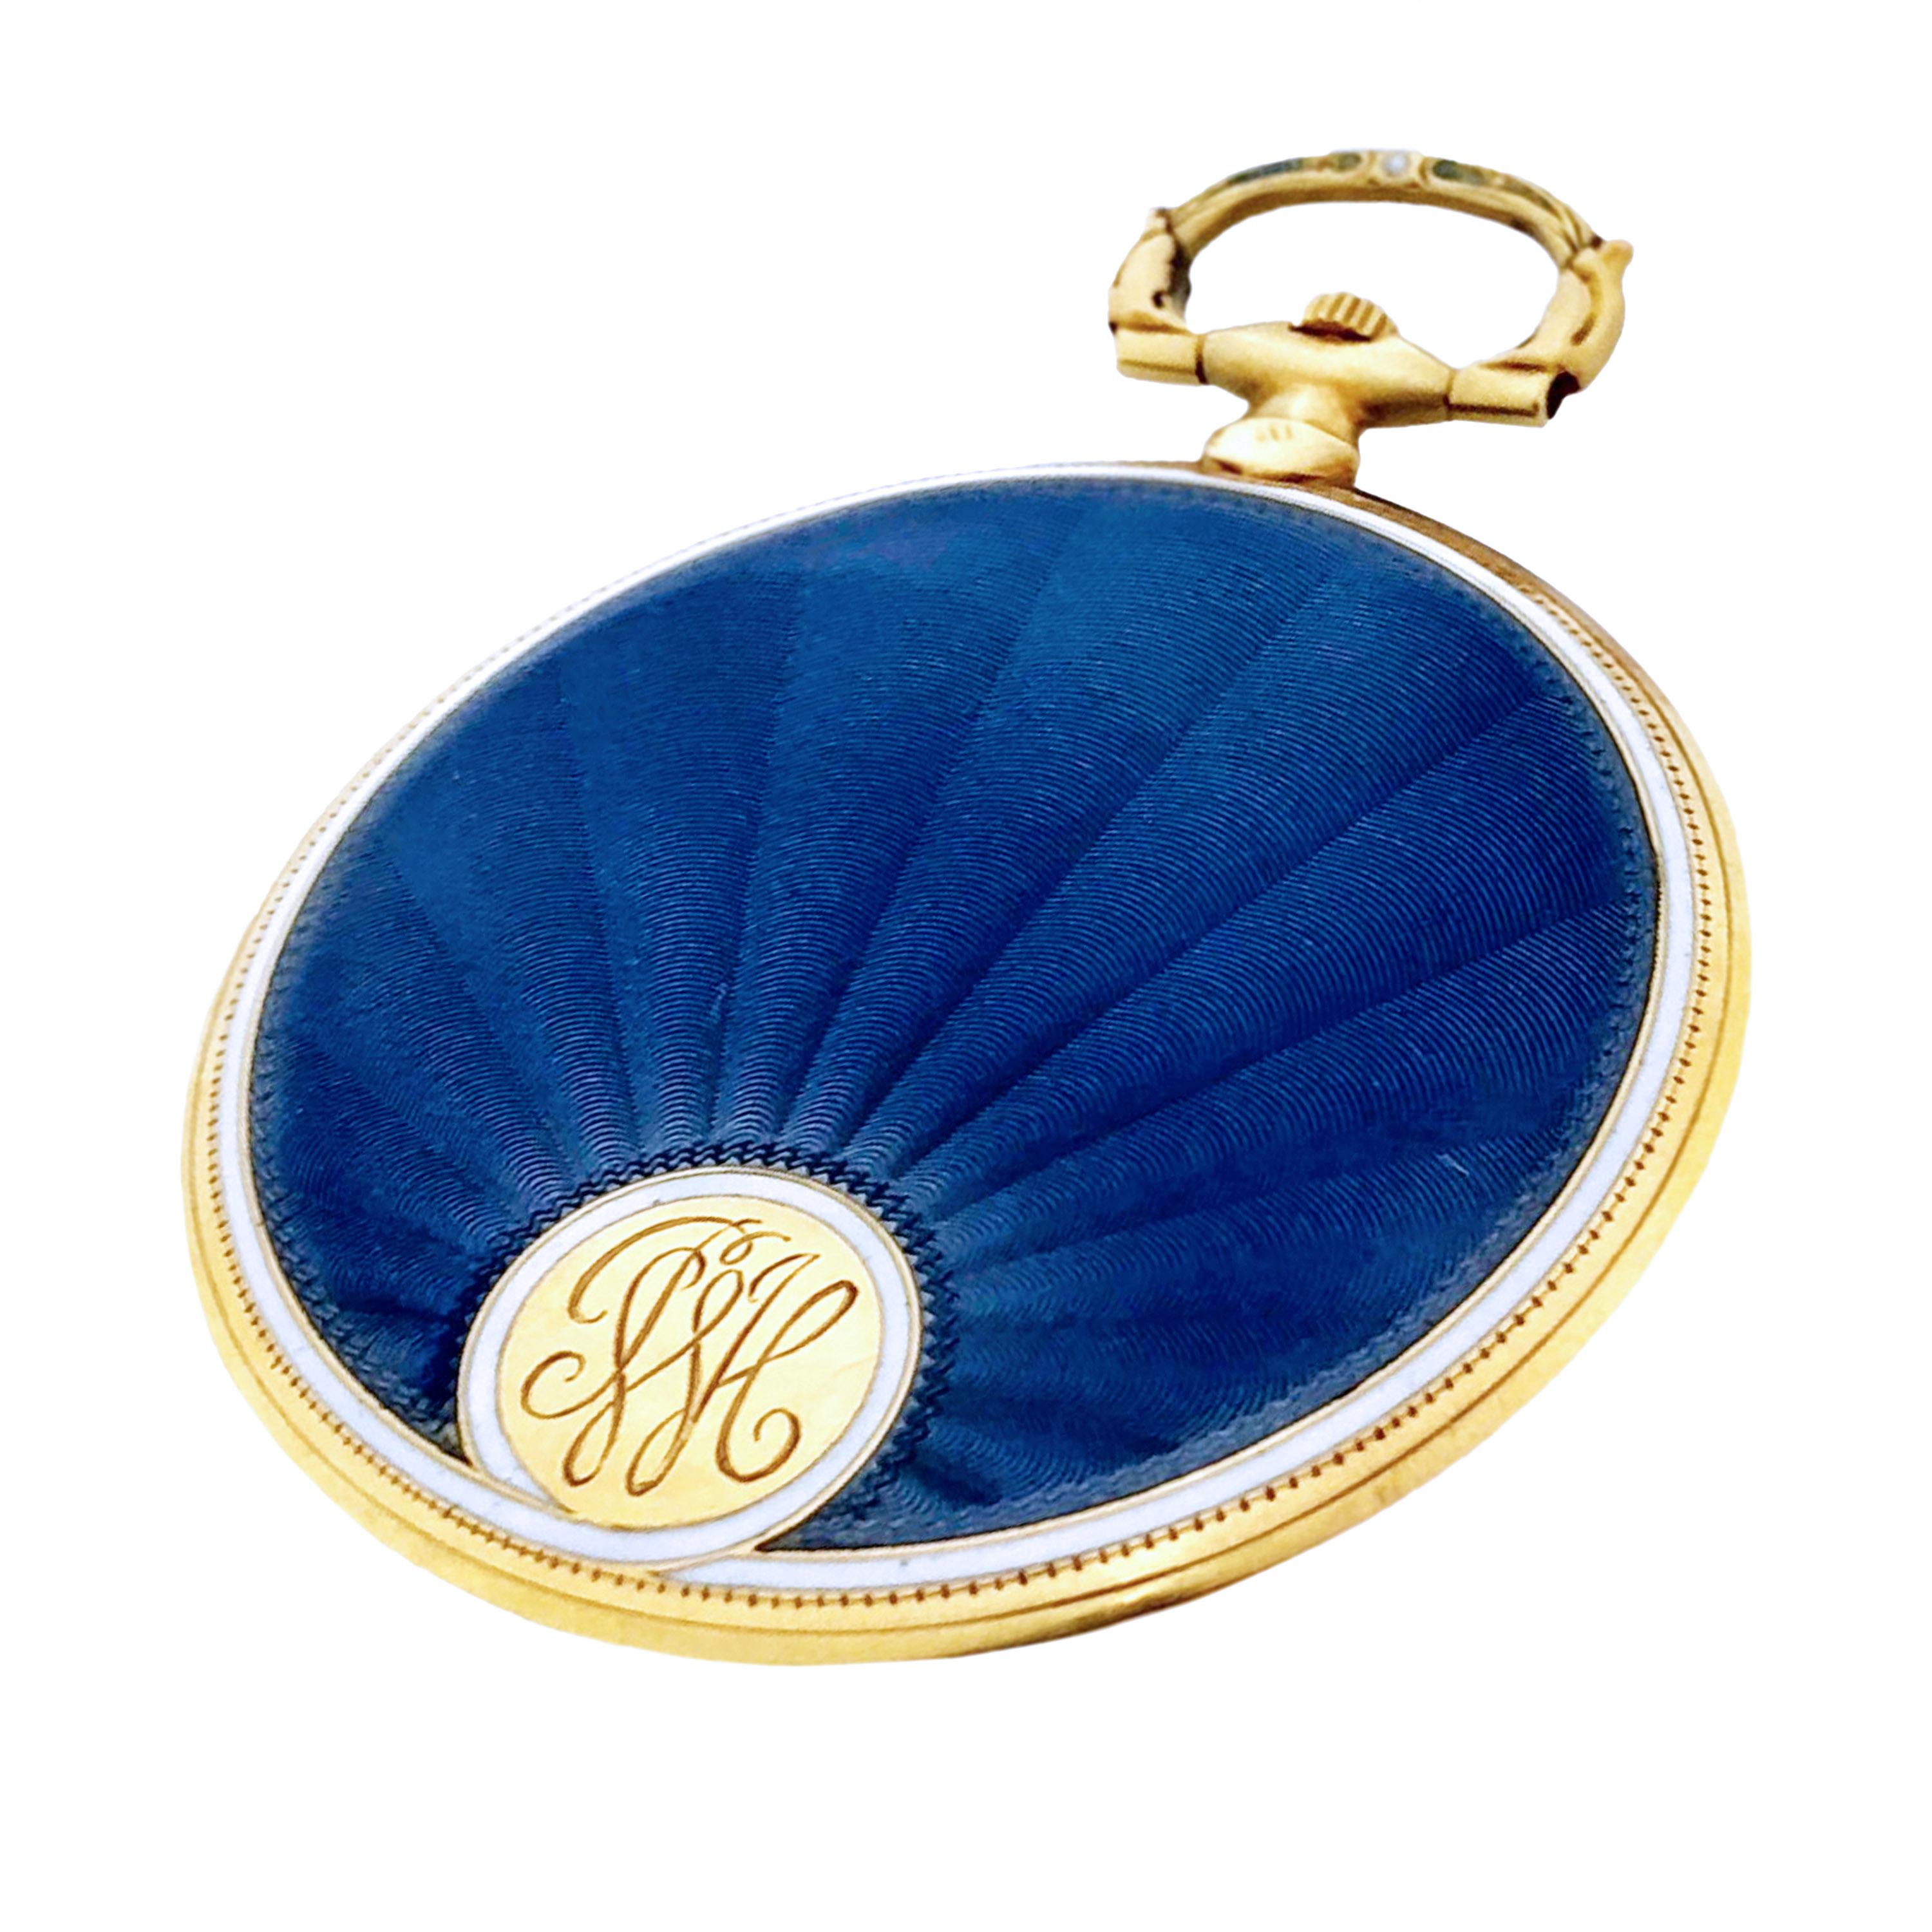 Circa 1920s Cartier pocket Watch, 46 MM Diameter and 4.5 MM thick 18K Yellow Gold 2 piece case. Blue and White Guilloche Enamel. Mechanical, Manual wind EWC, European Watch & Clock Movement. White Guilloche Dial with Black Roman Numerals. Excellent